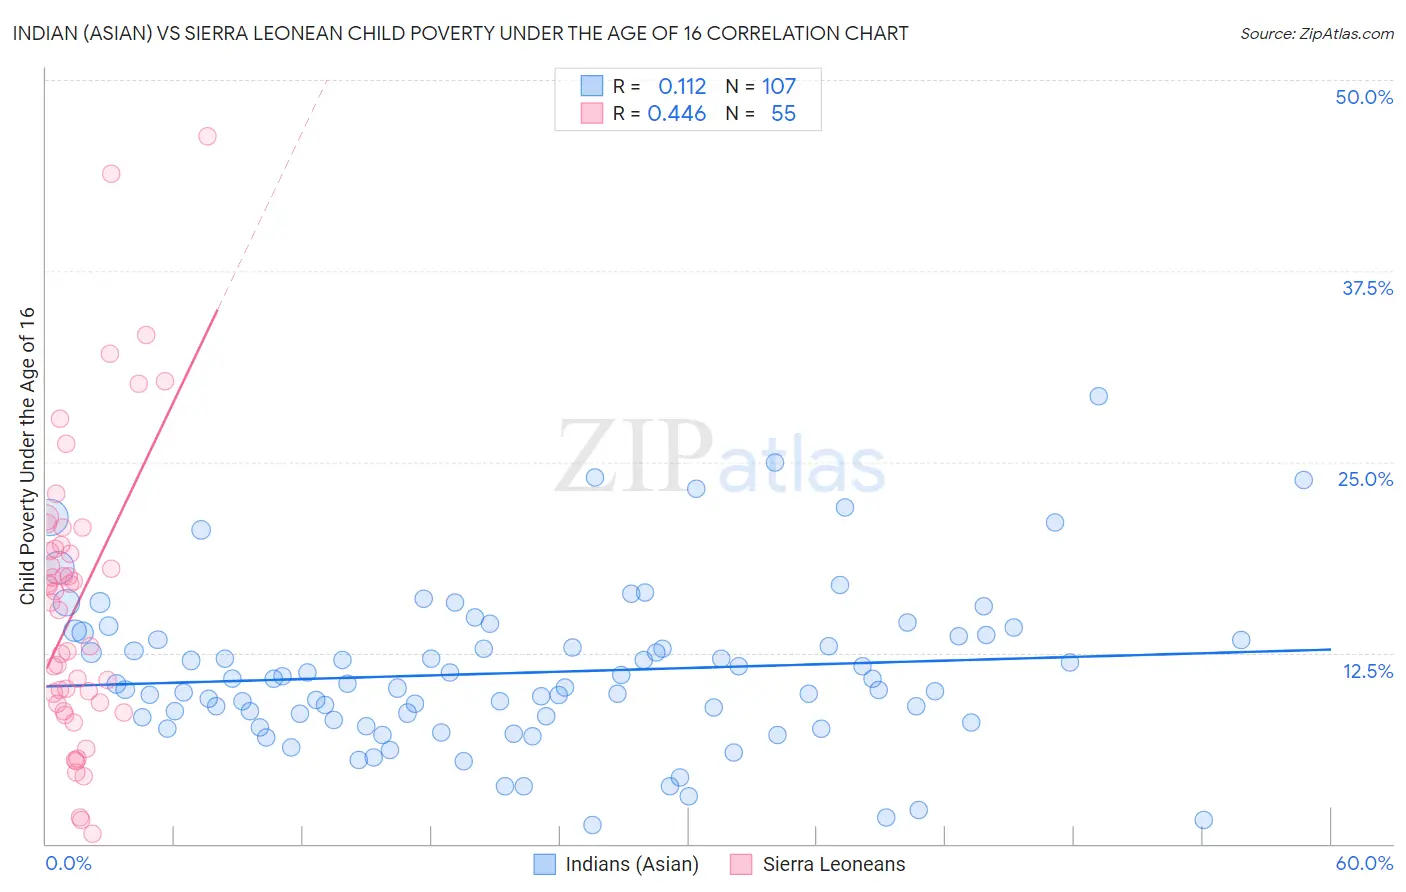 Indian (Asian) vs Sierra Leonean Child Poverty Under the Age of 16